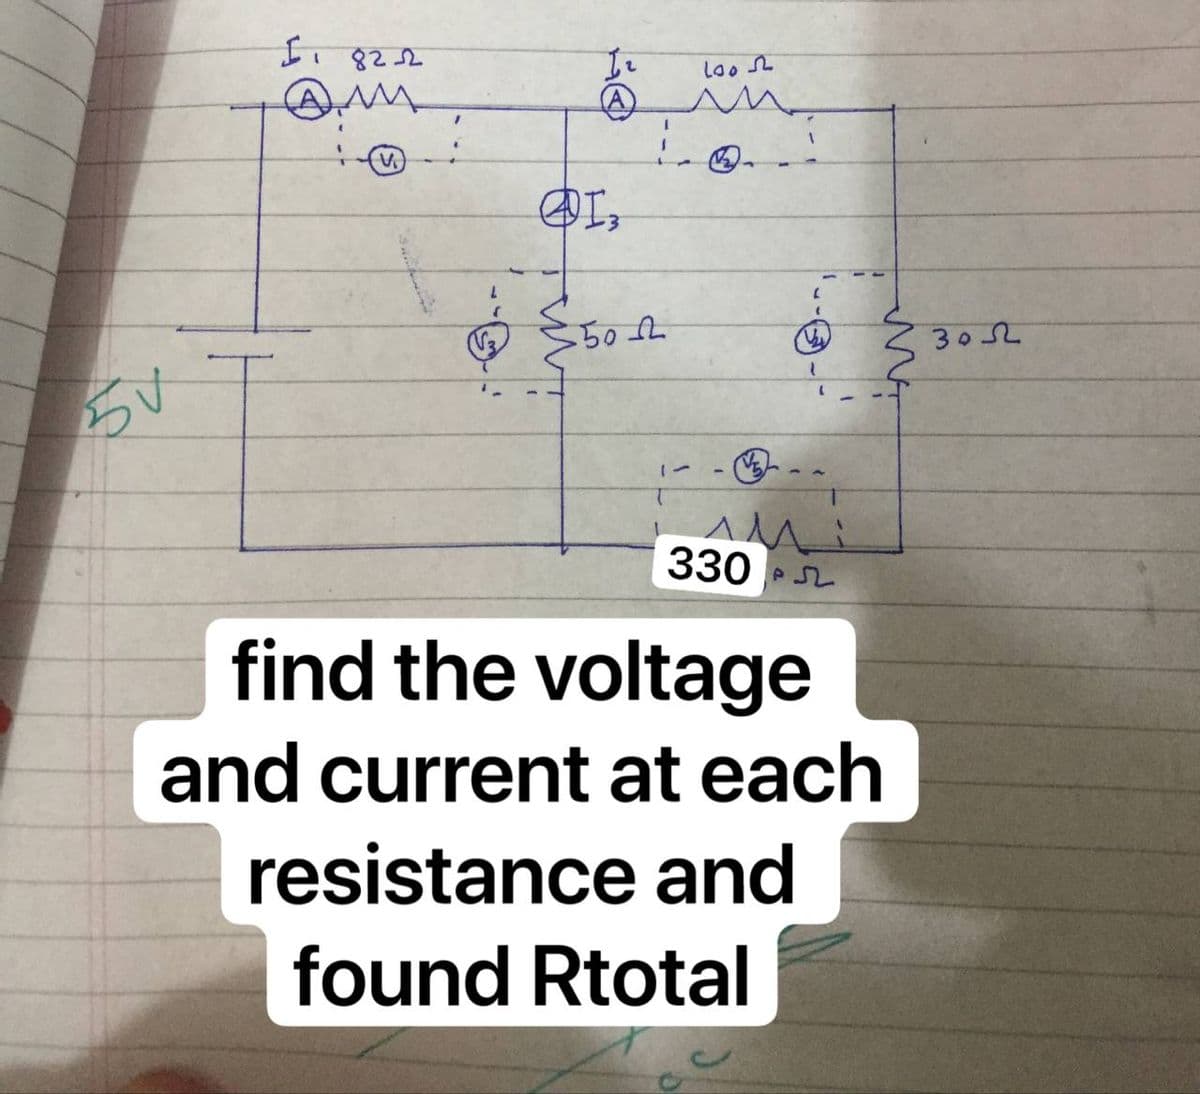 Ii 822
305
330
find the voltage
and current at each
resistance and
found Rtotal
